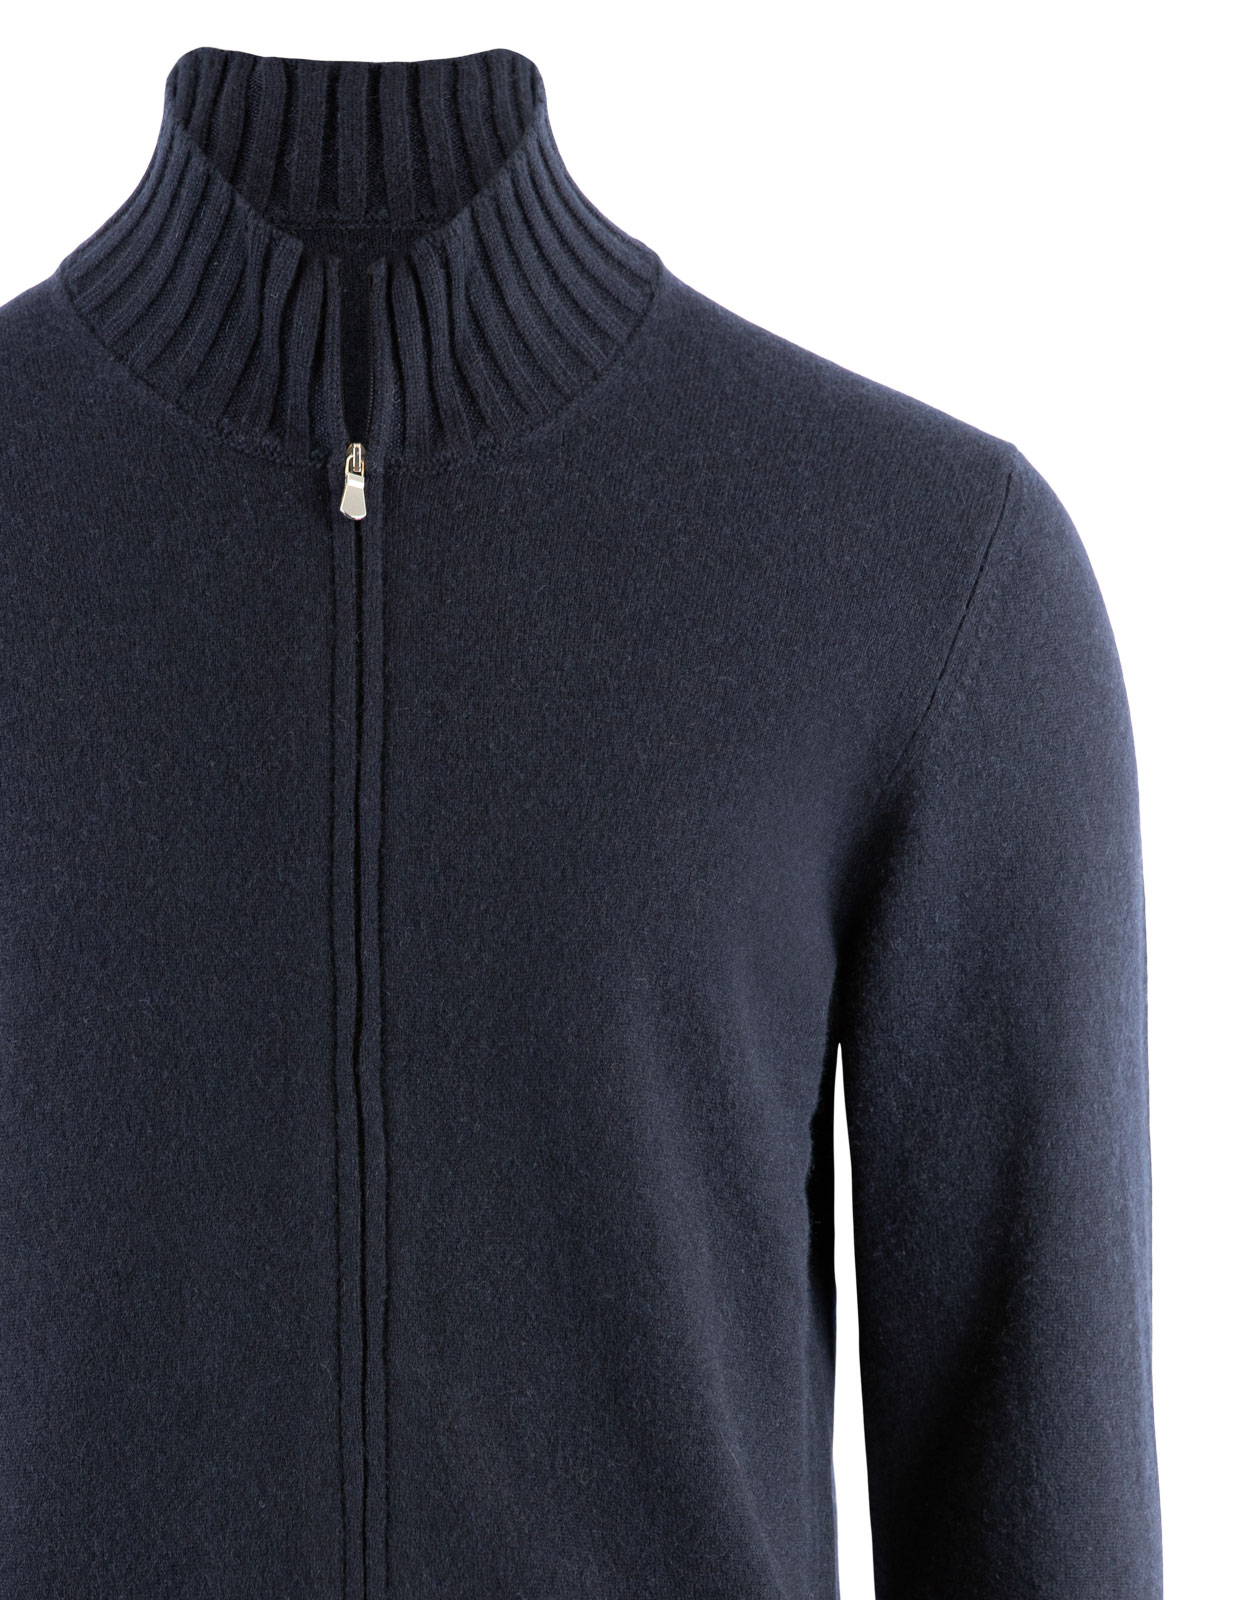 Full Zip Cardigan Felted Cashmere Navy